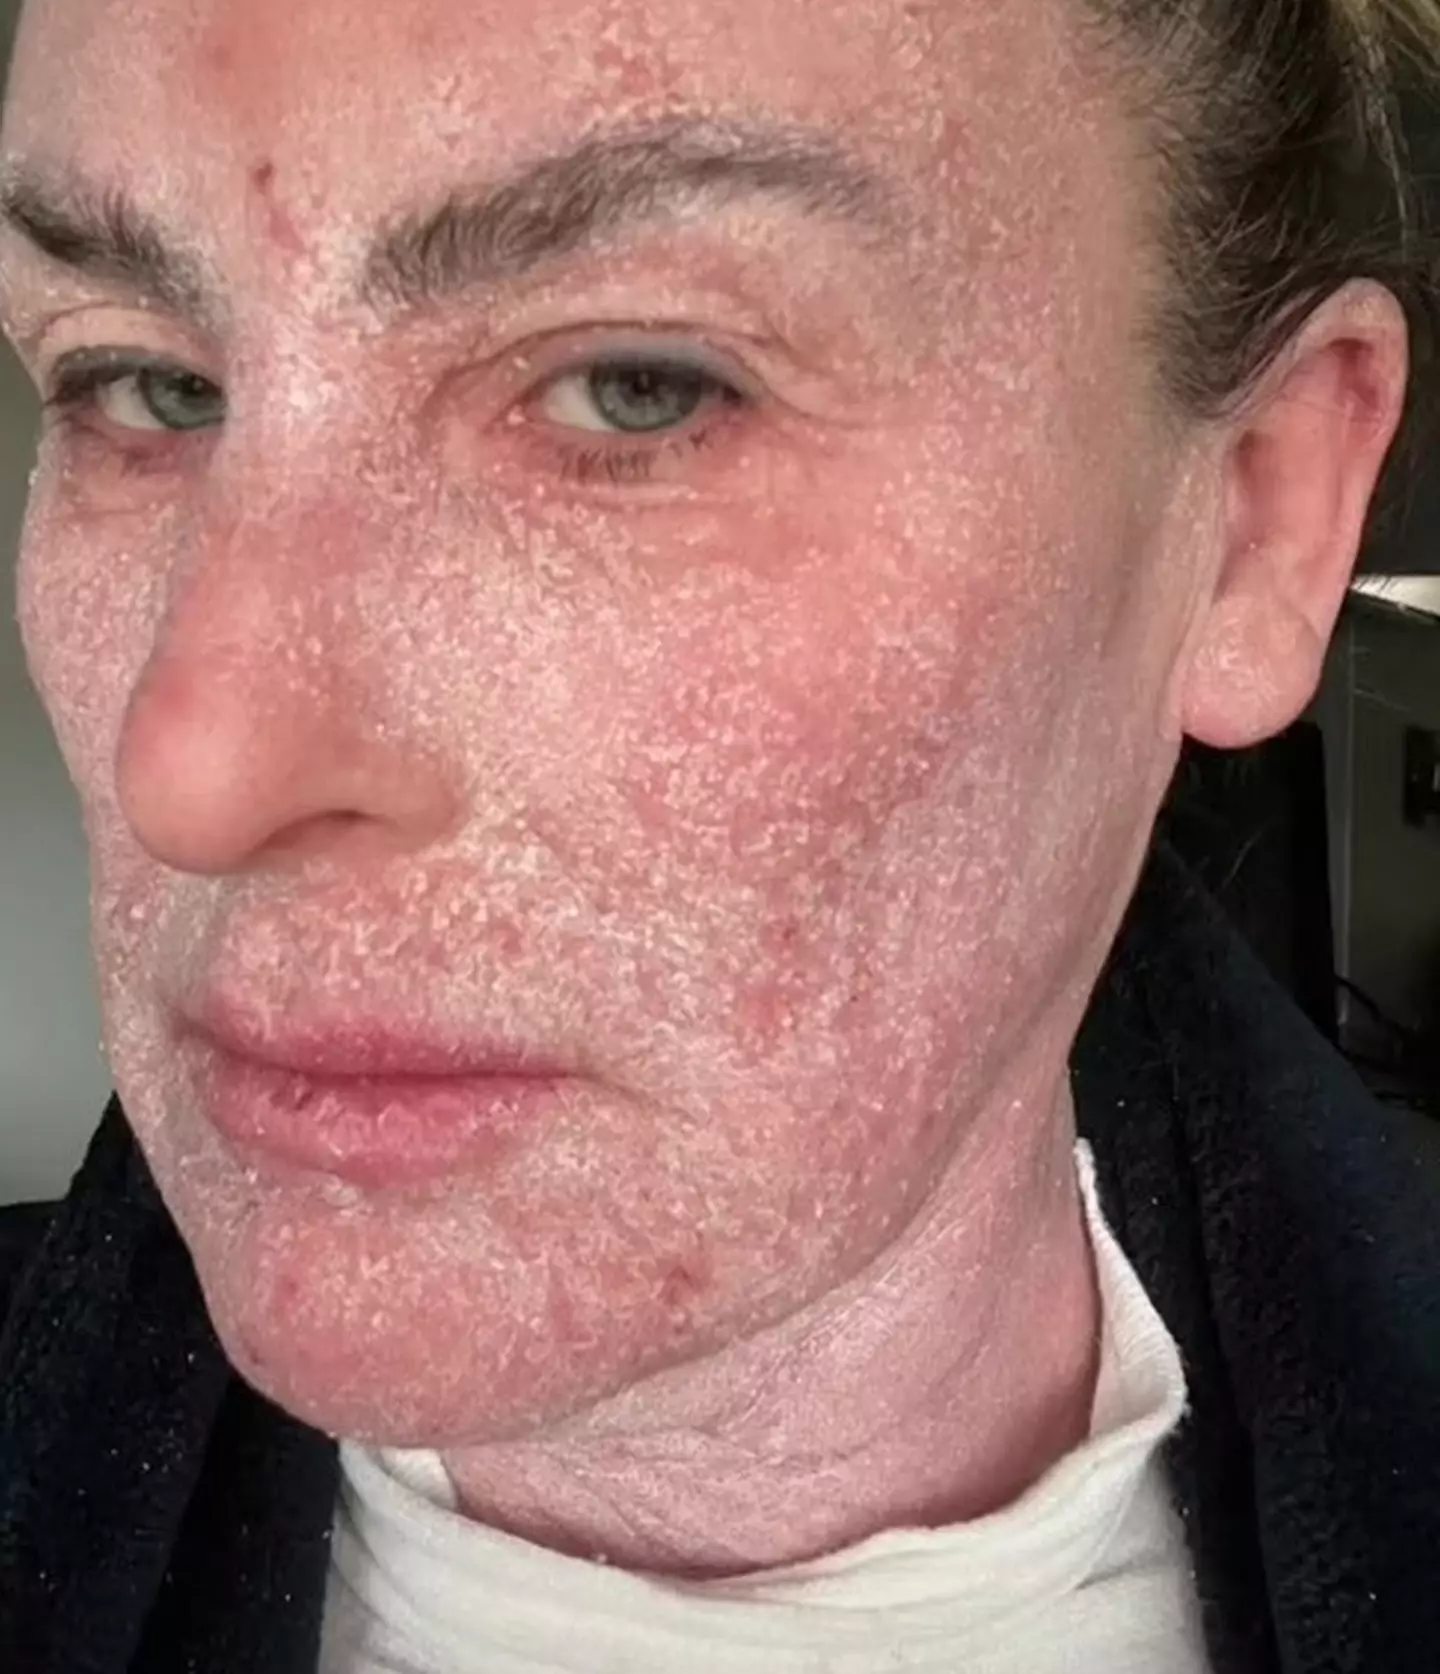 Karyn Flett has suffered with severe eczema for the majority of her life.